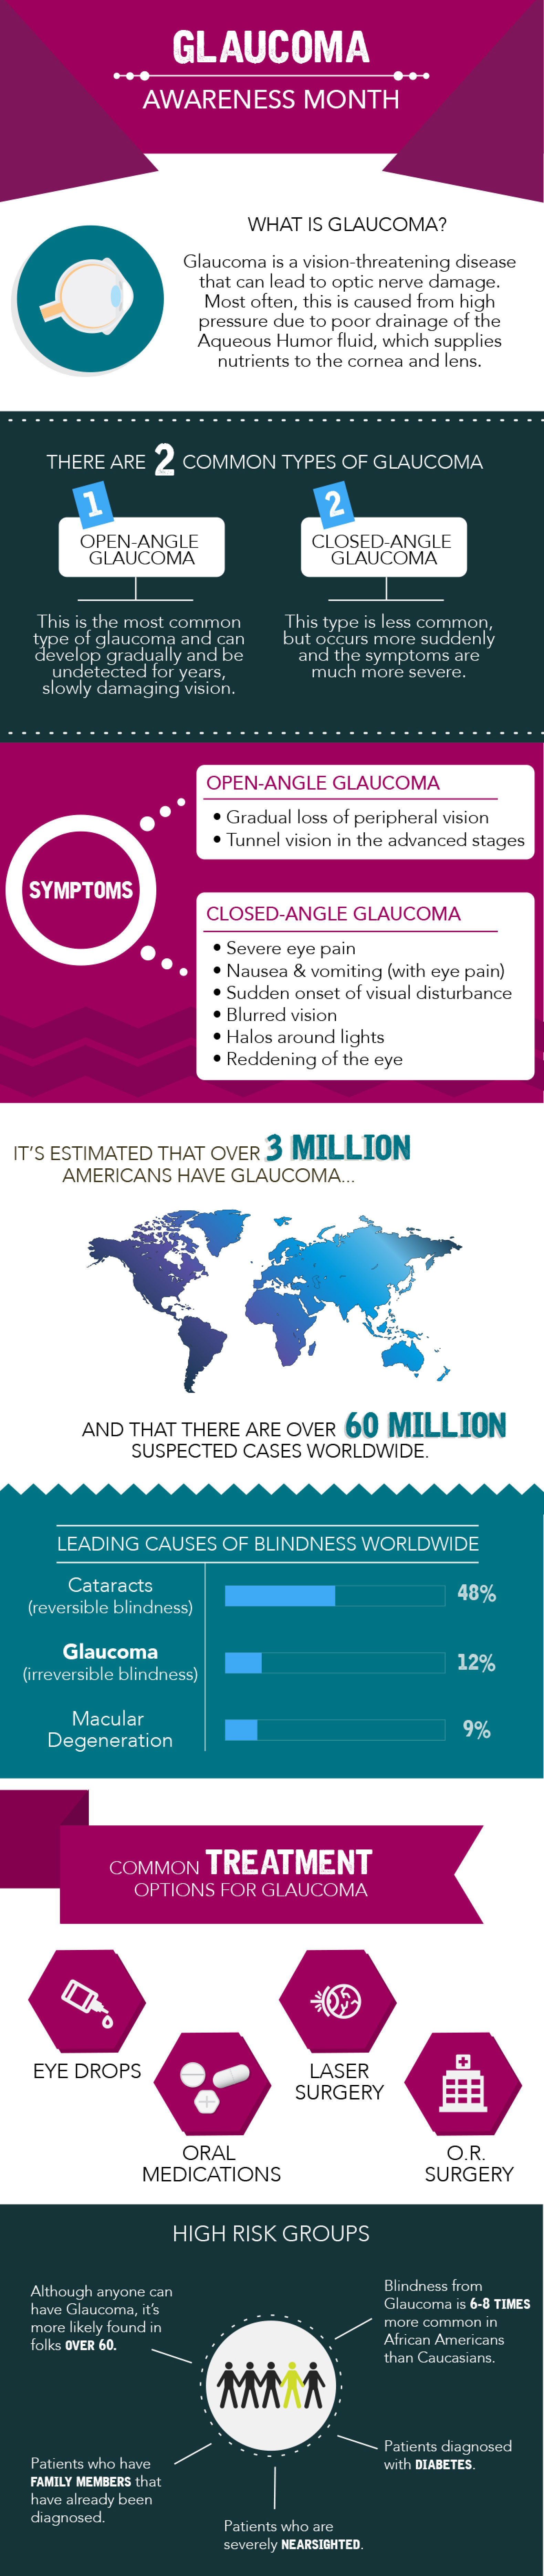 glaucoma awareness month, risks and symptoms.